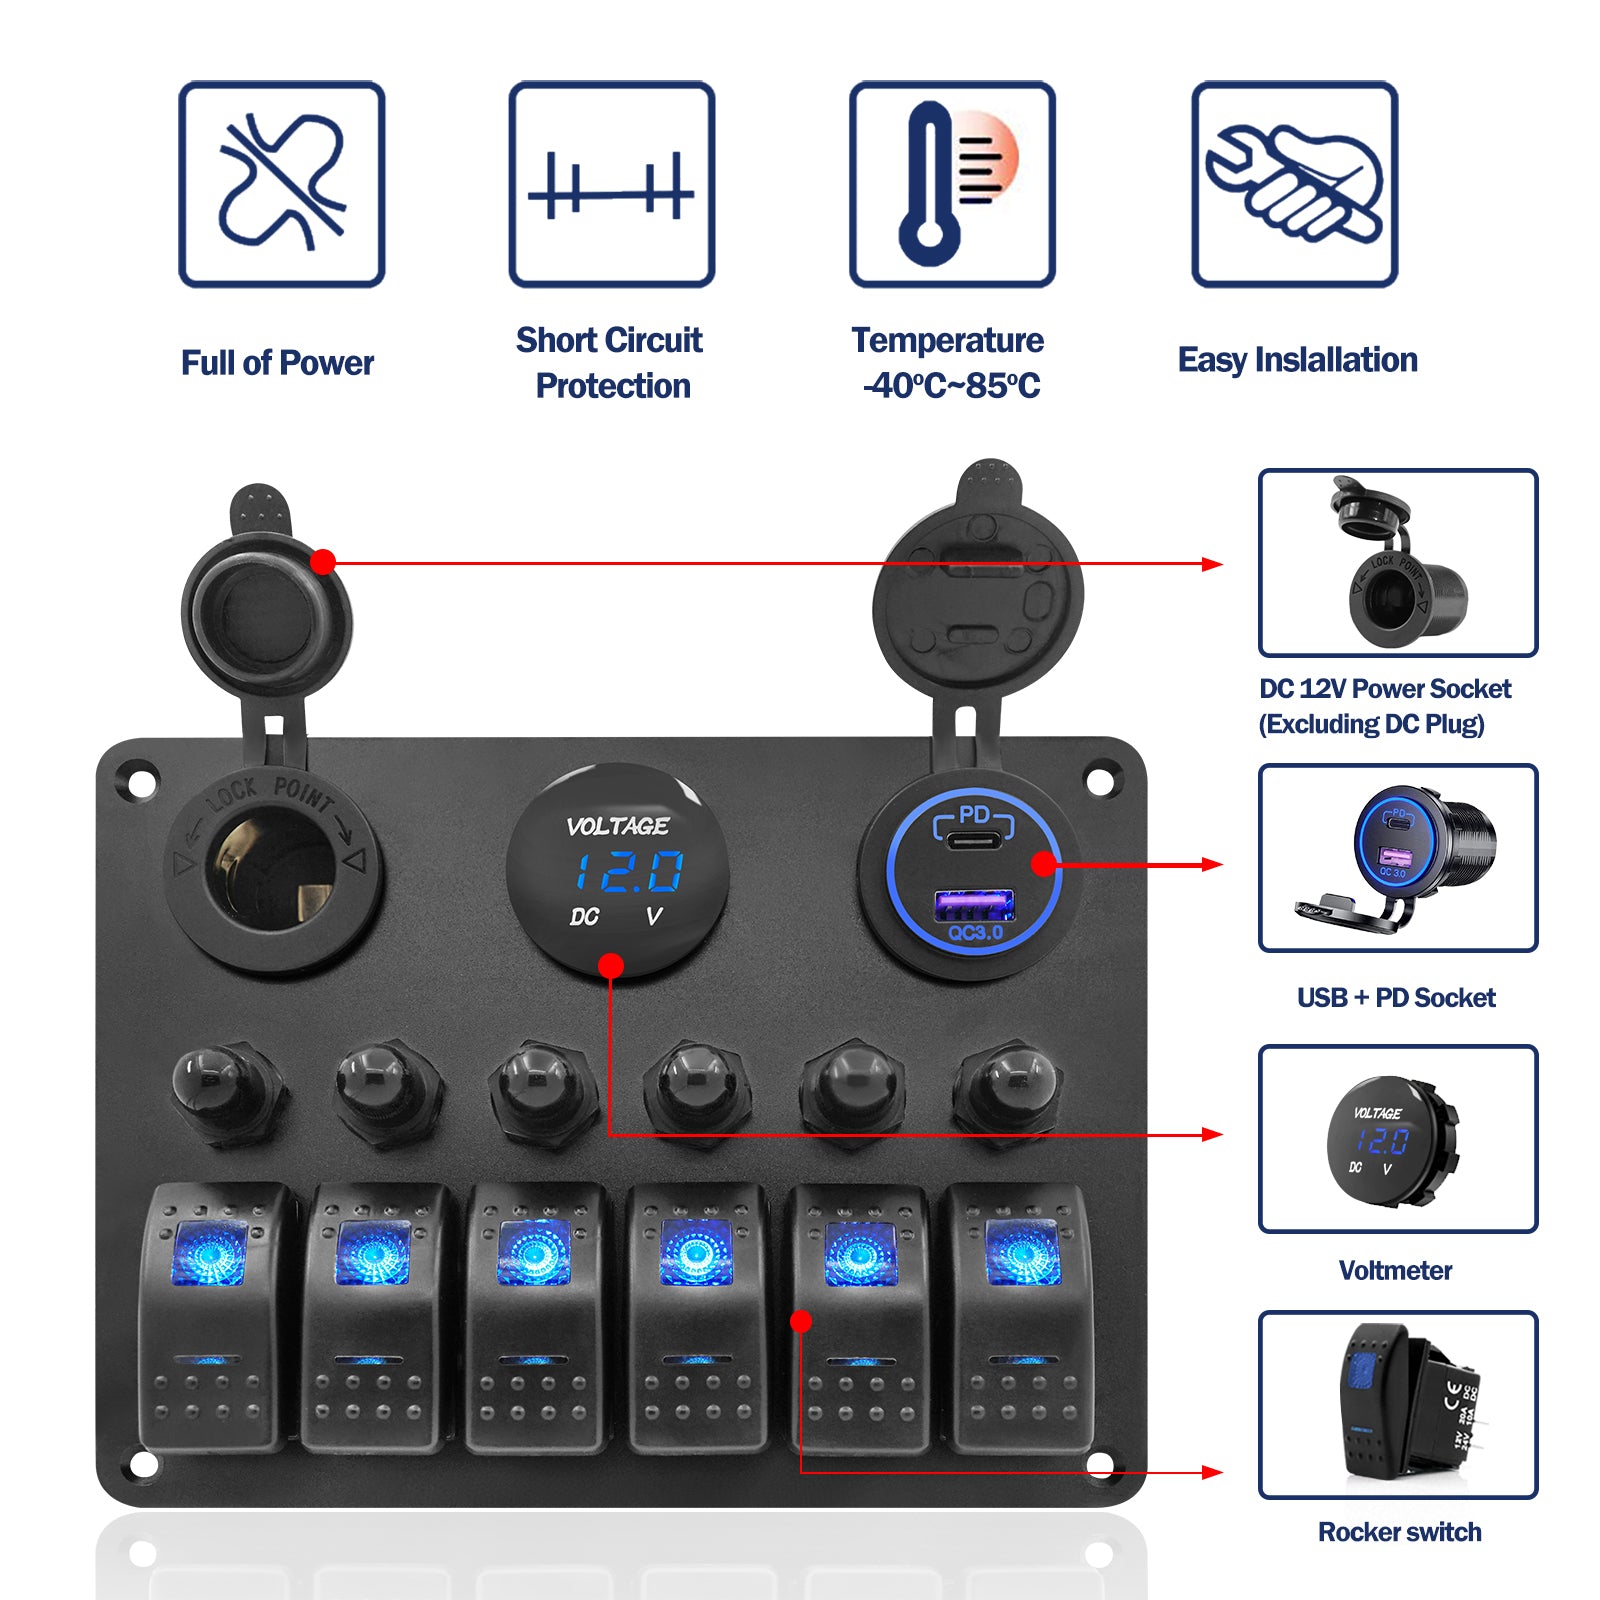 THALASSA 6 Gang Marine Boat Rocker Switch Aluminum Panel Waterproof with Circuit Breaker, Blue Digital Voltage Display, Dual PD+QC3.0 USB Outlet, Cigarette Lighter Port for Car Truck Rv Vehicles Yacht